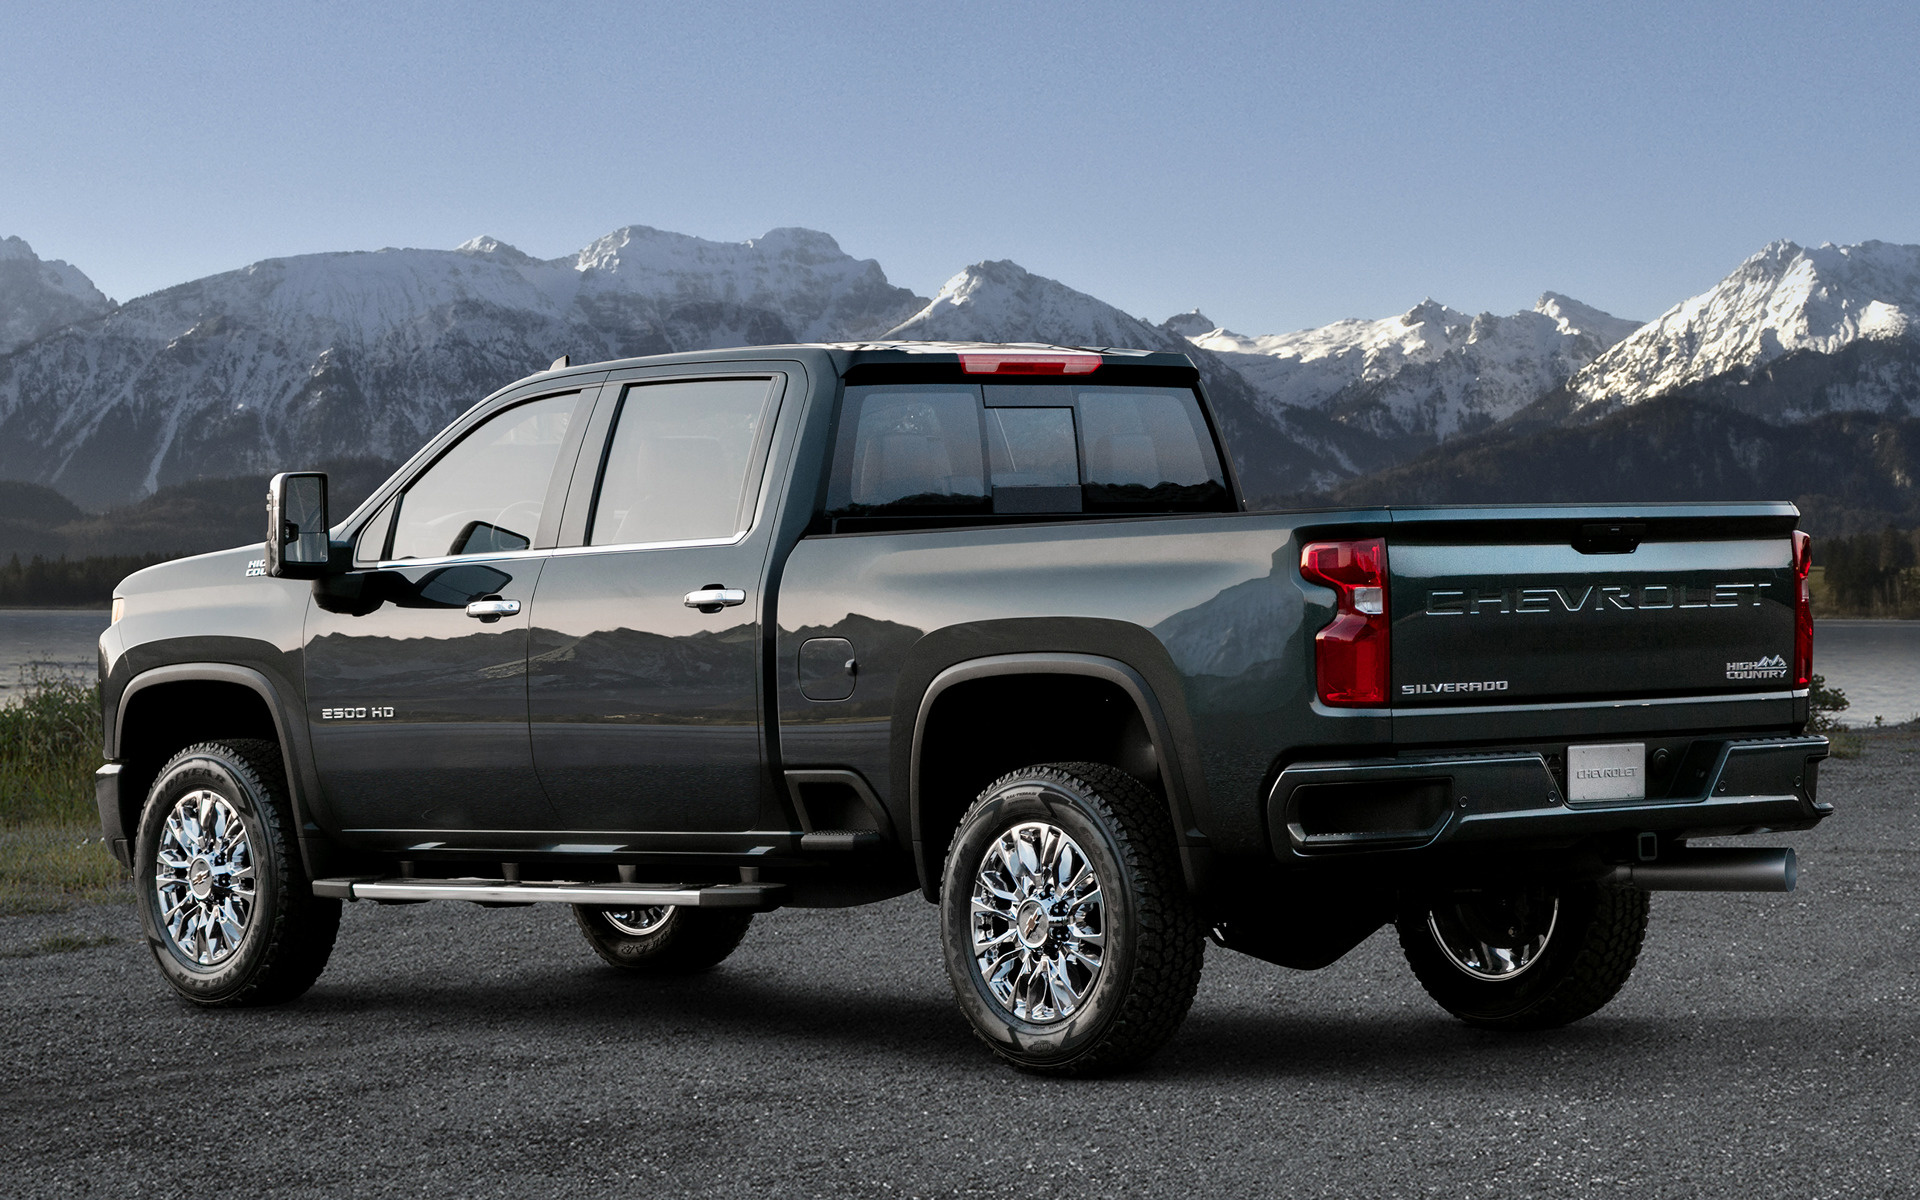 2020 Chevrolet Silverado 2500 HD High Country Crew Cab - Wallpapers and